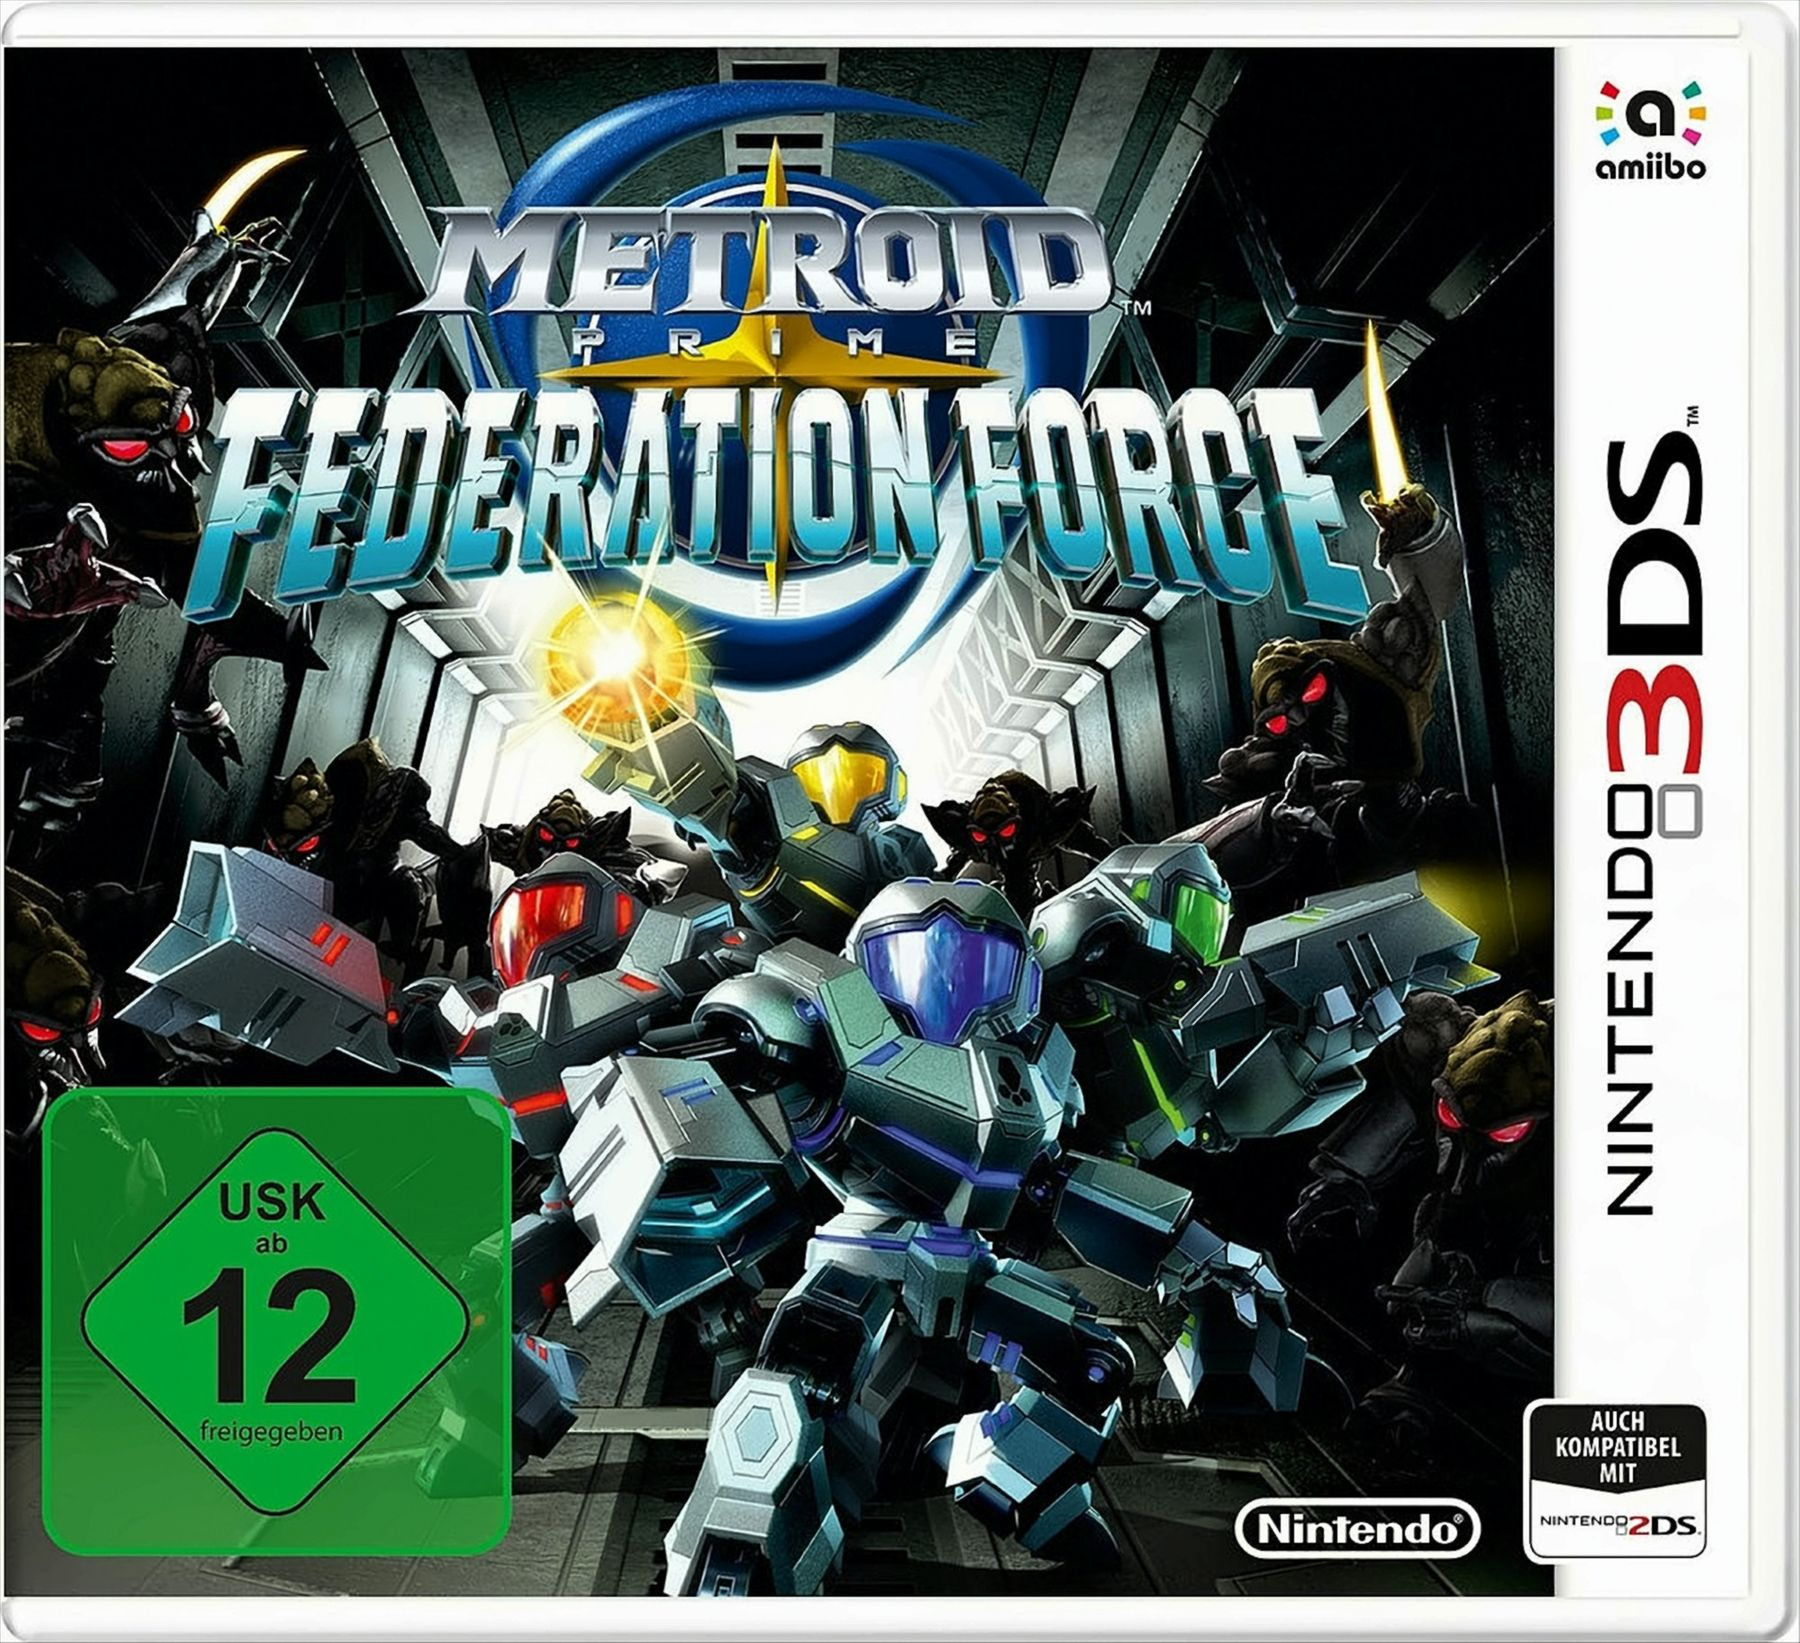 Metroid Prime: Federation Force - 3DS] [Nintendo